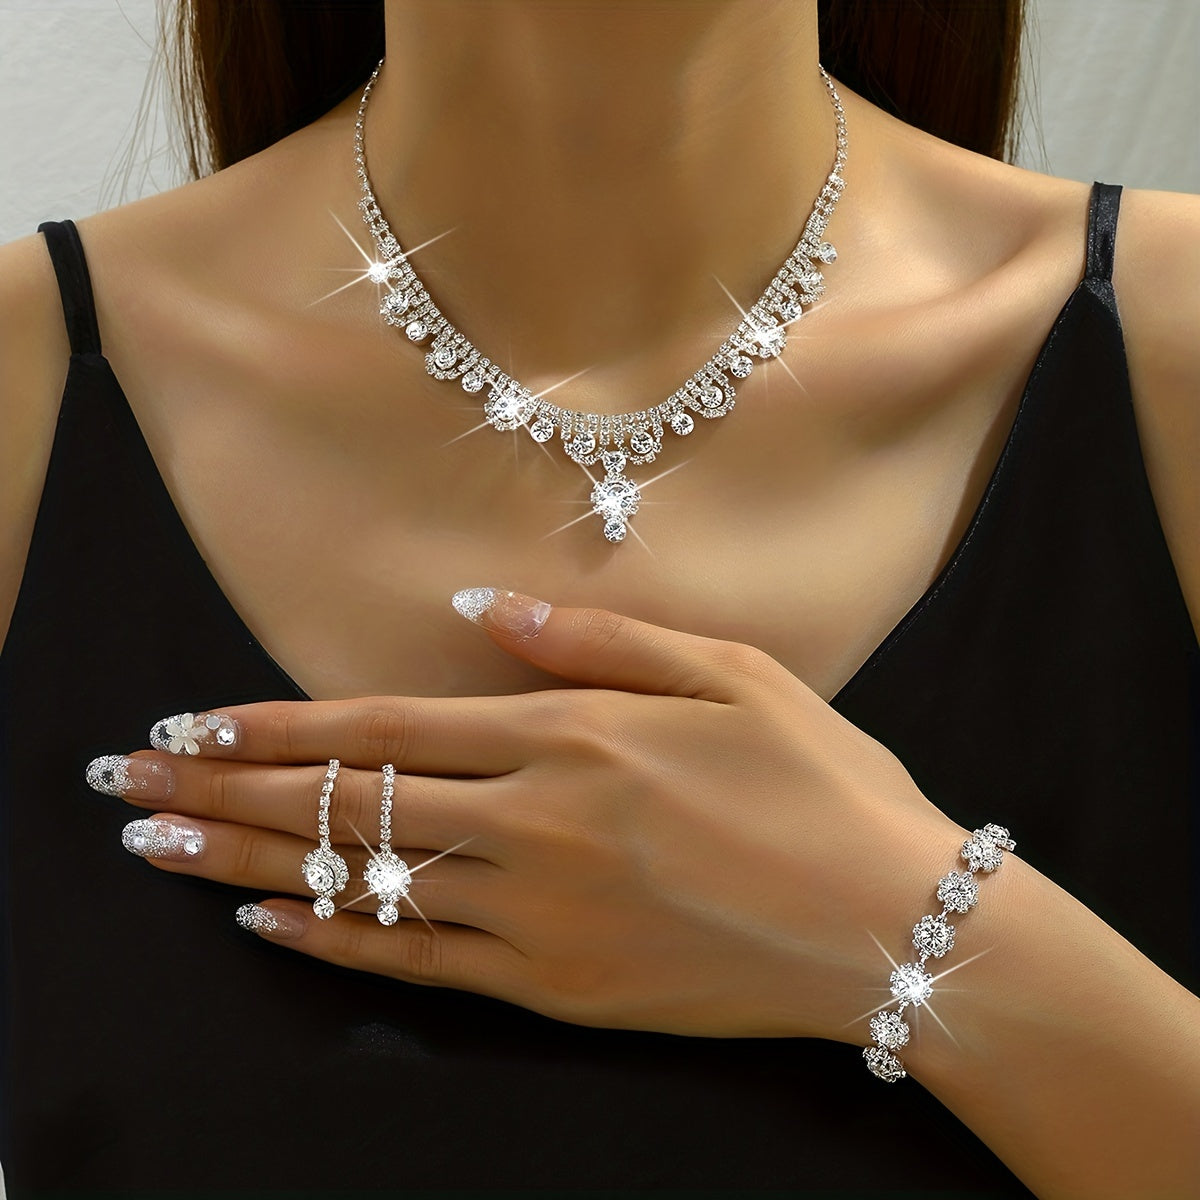 4pcs Necklace Earrings Plus Bracelet Elegant Jewelry Set Silver Plated Inlaid Rhinestone Evening Party Decor Perfect Chrismas Gift For Female